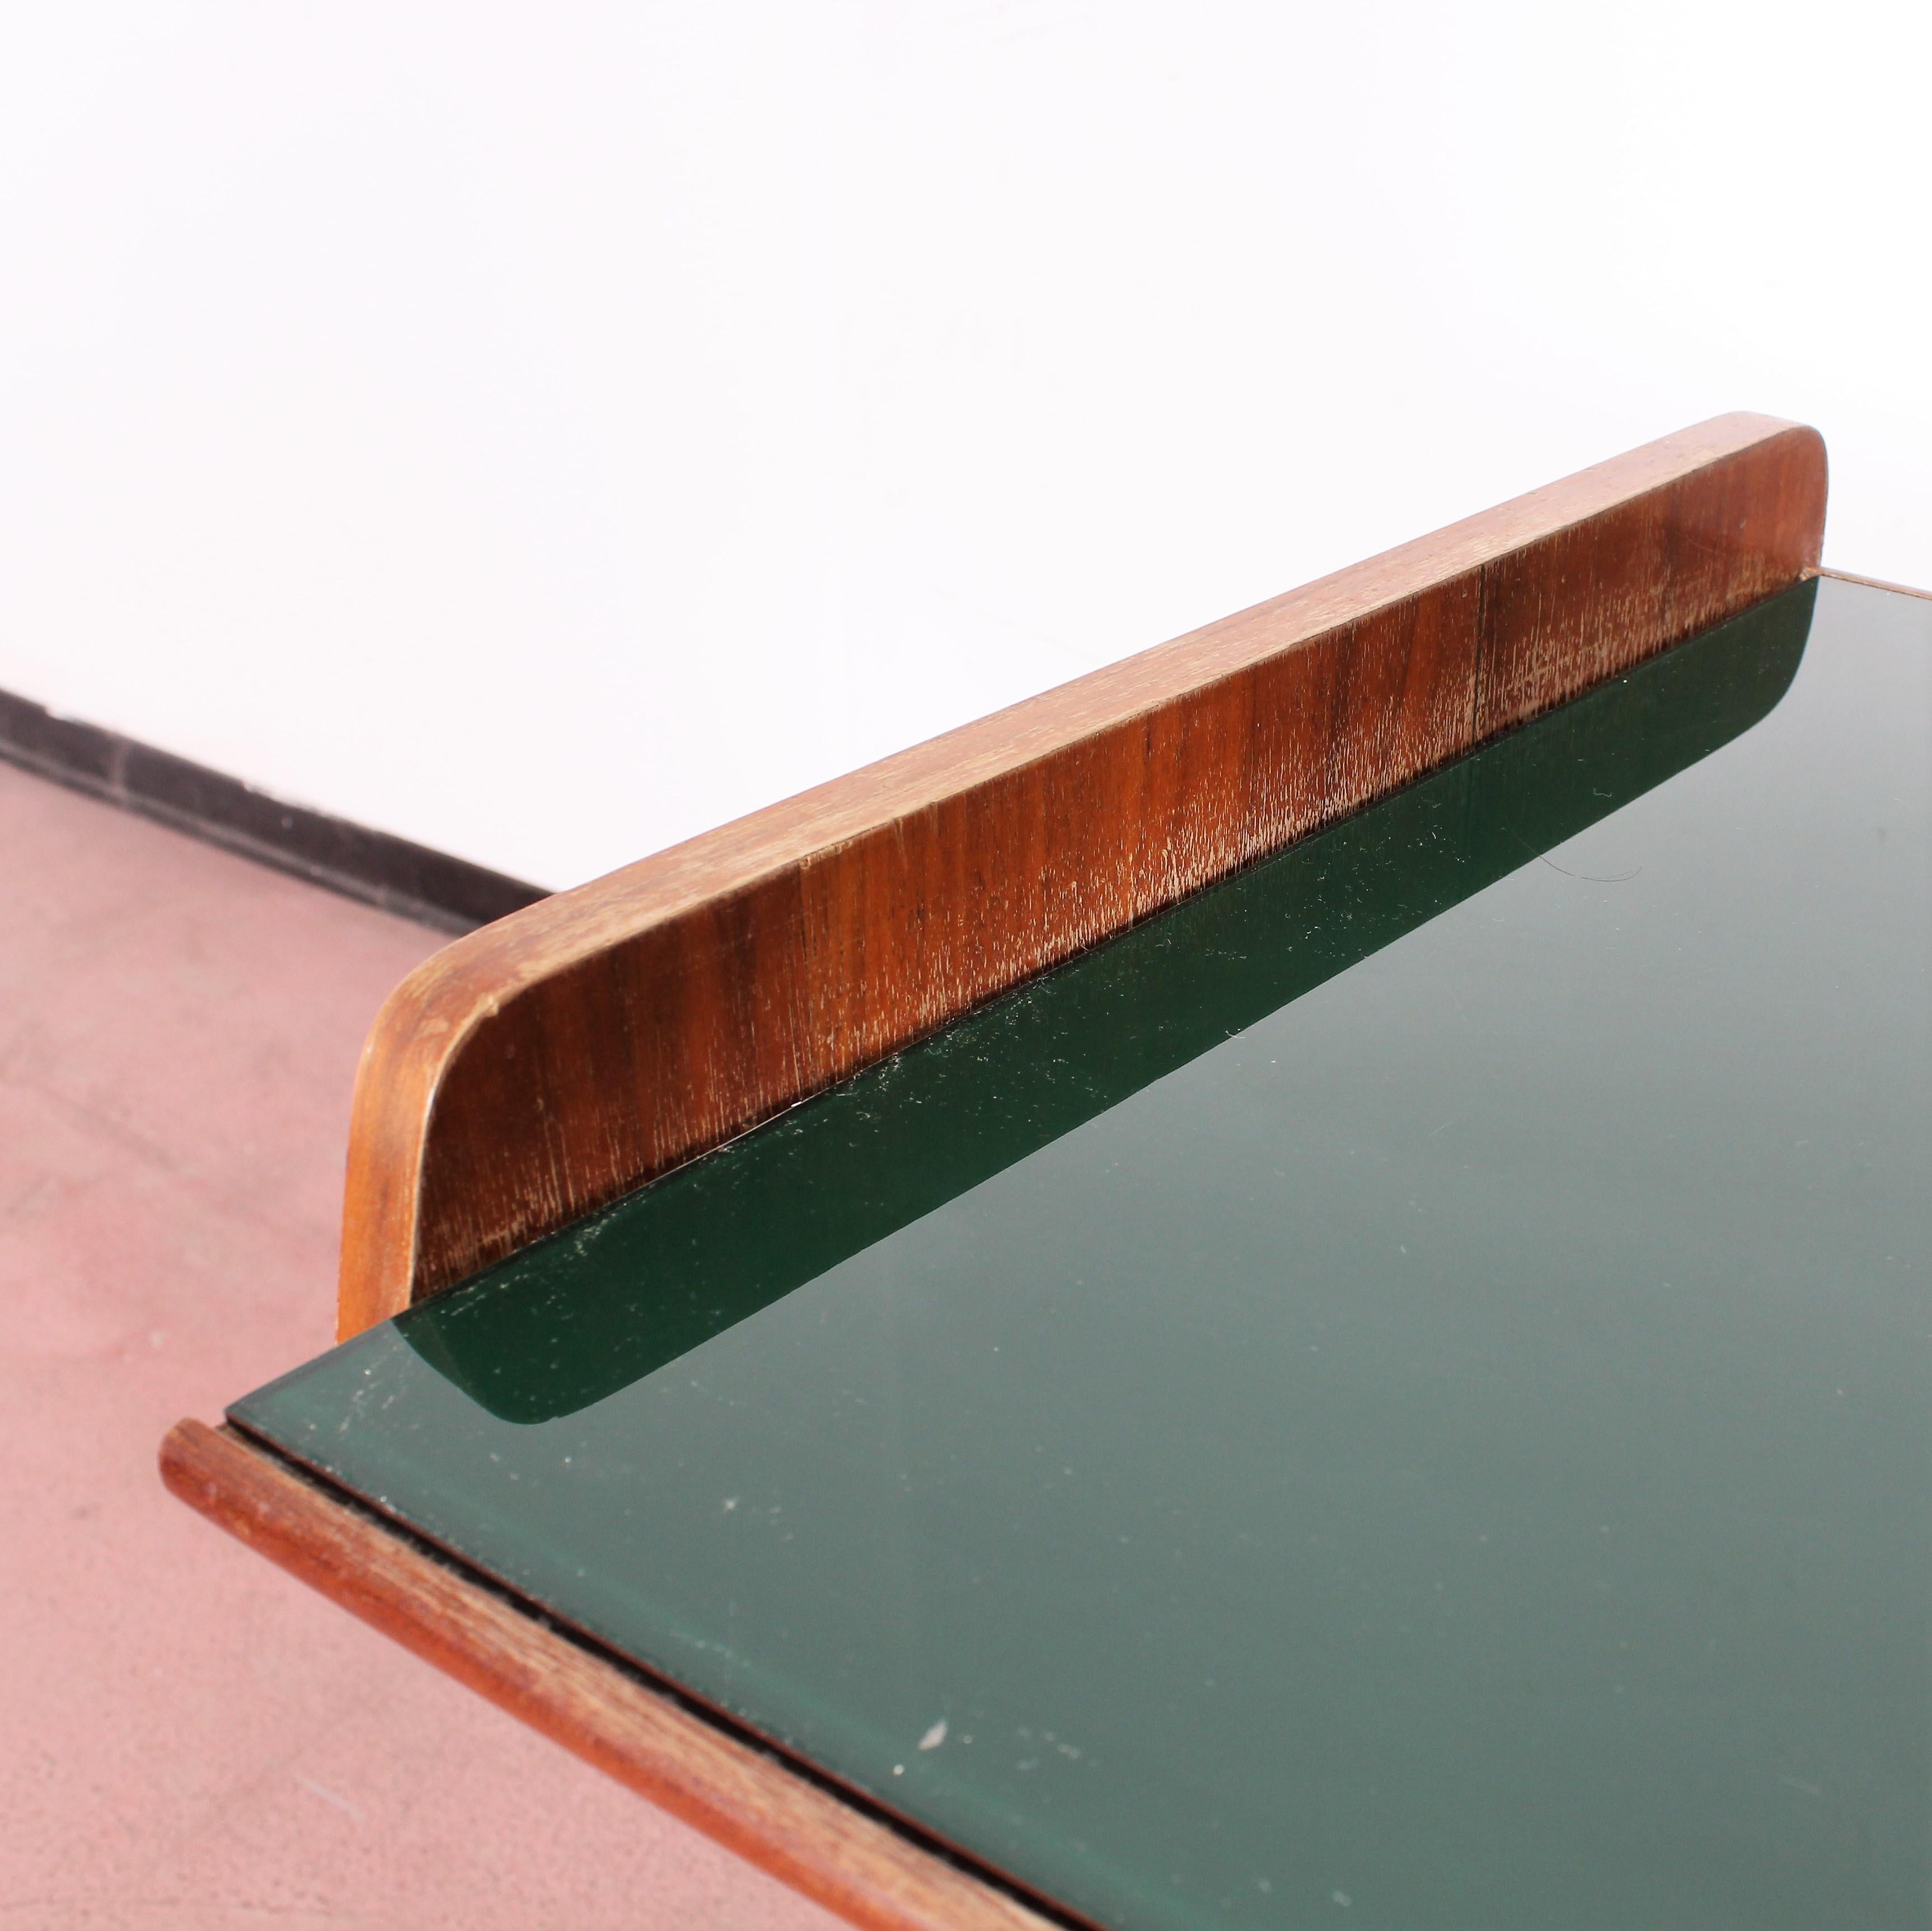 Italian Midcentury Gio Ponti Maple Wood Console with Green Glass, Italy, 1950s